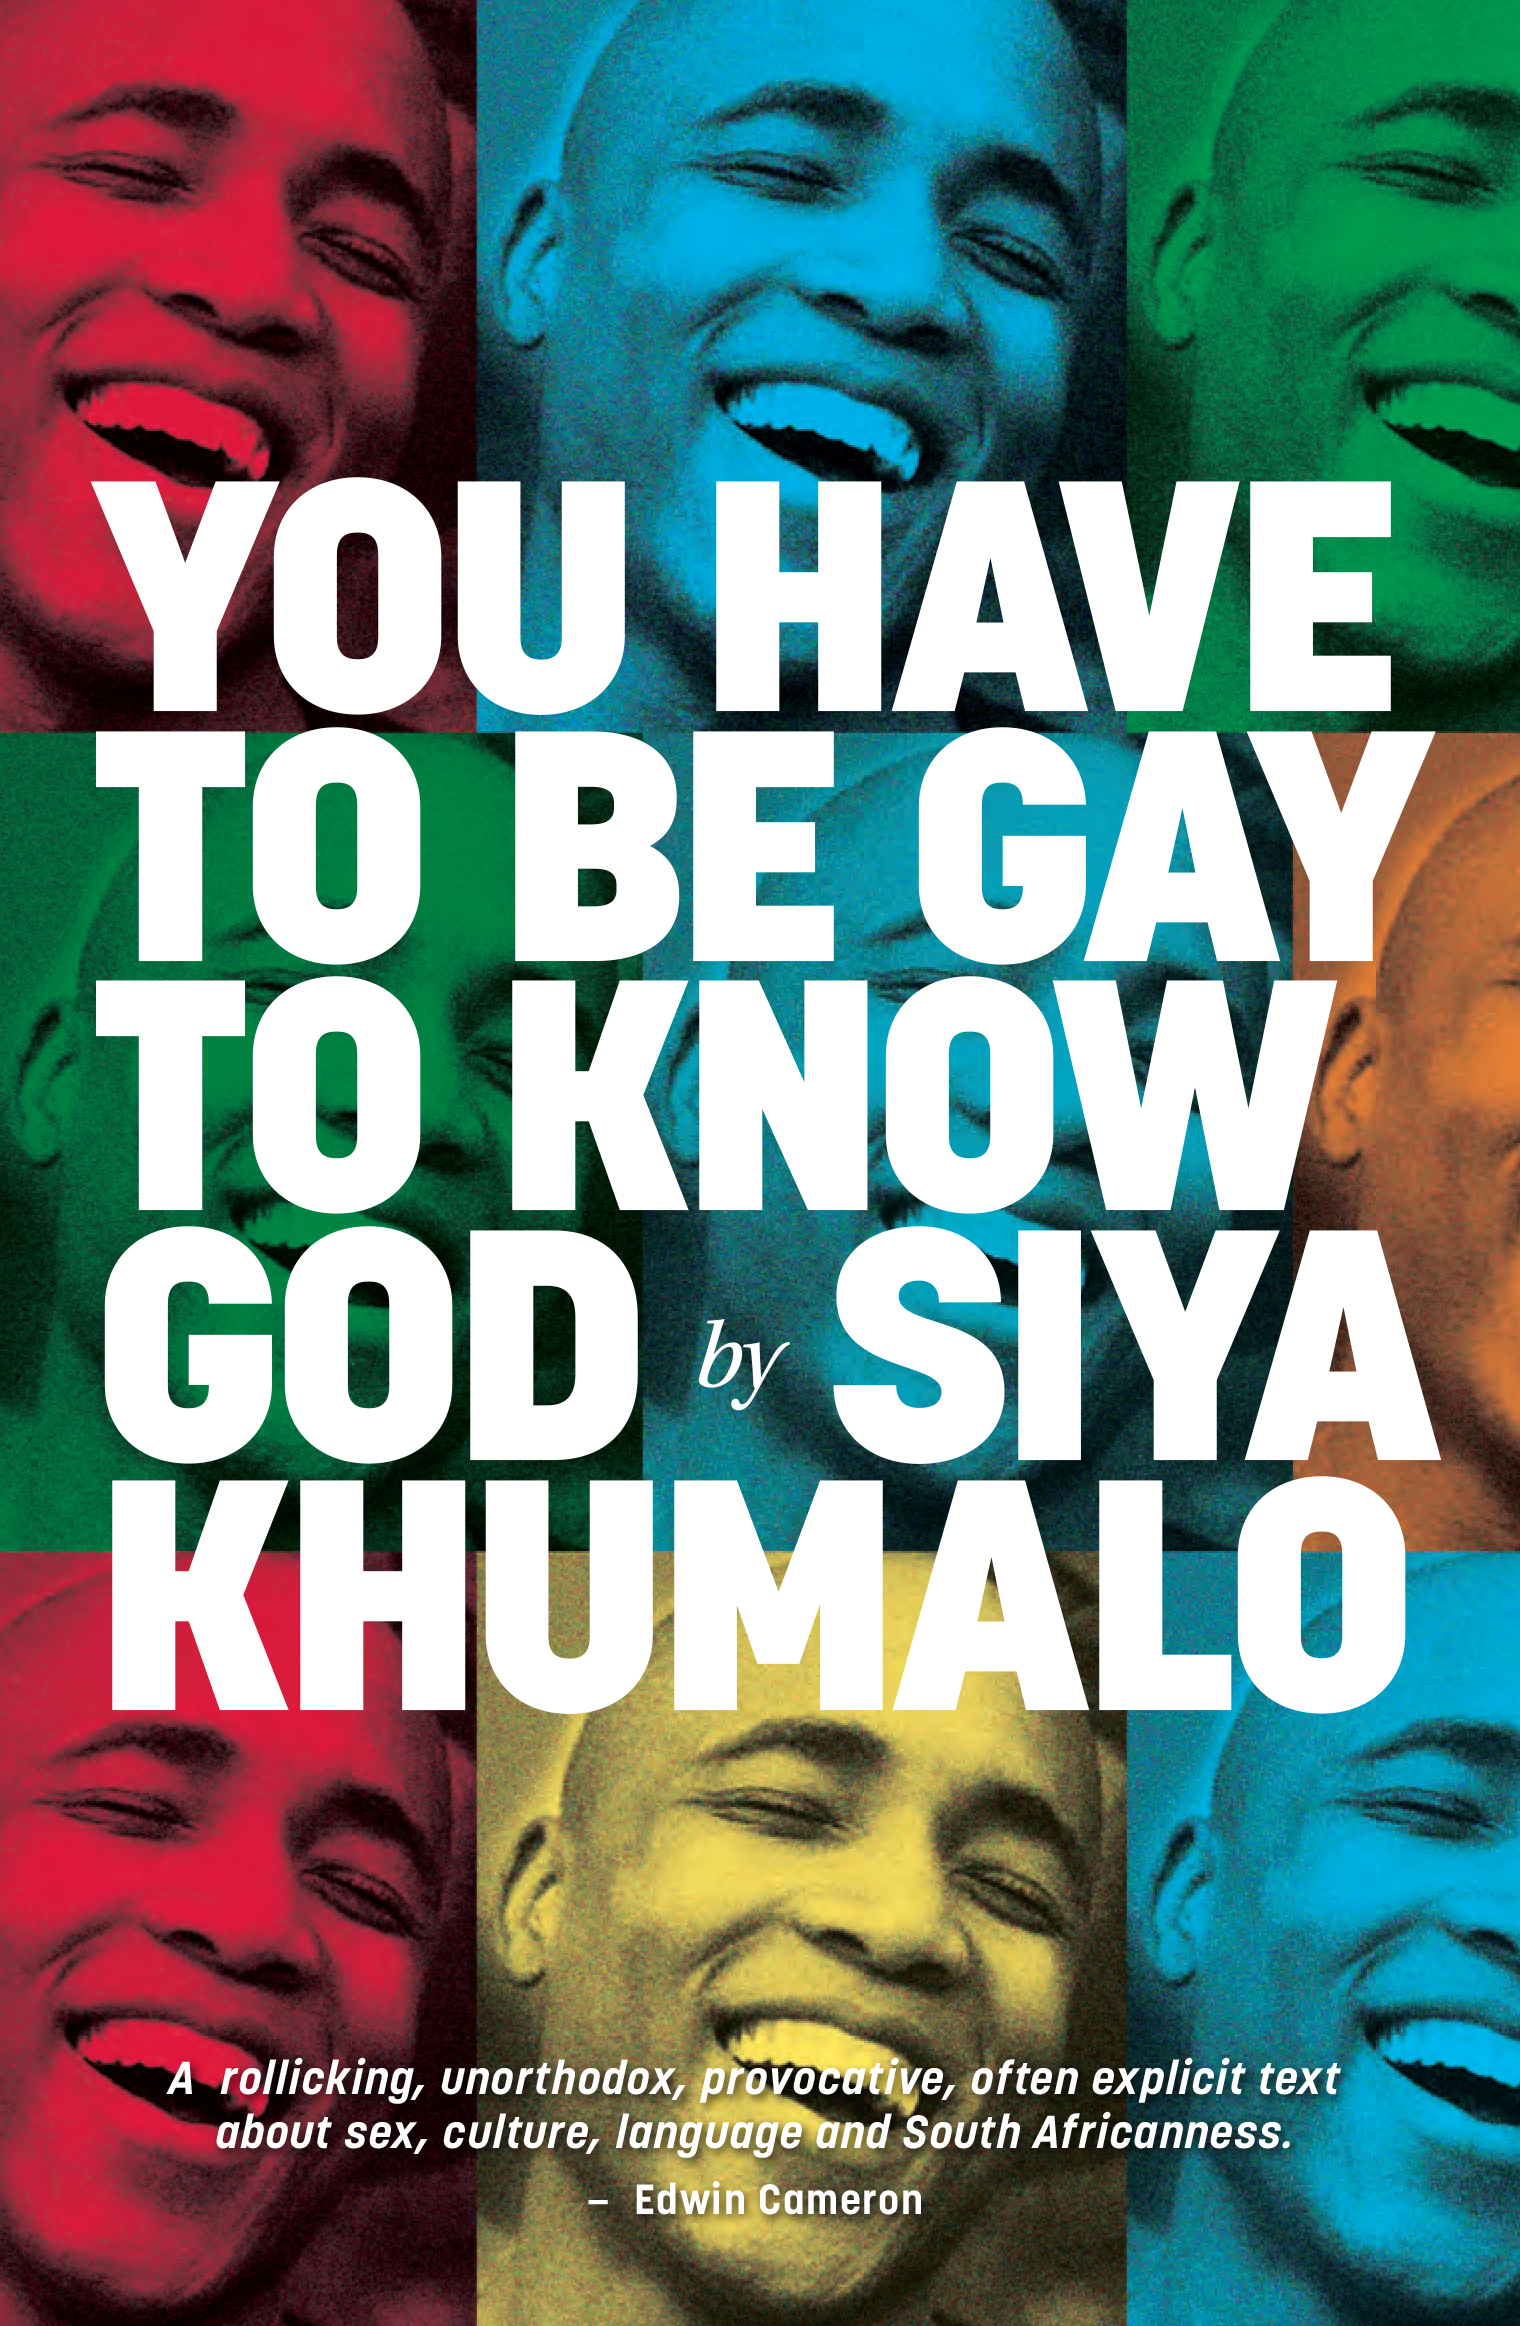 You have to be gay to know god